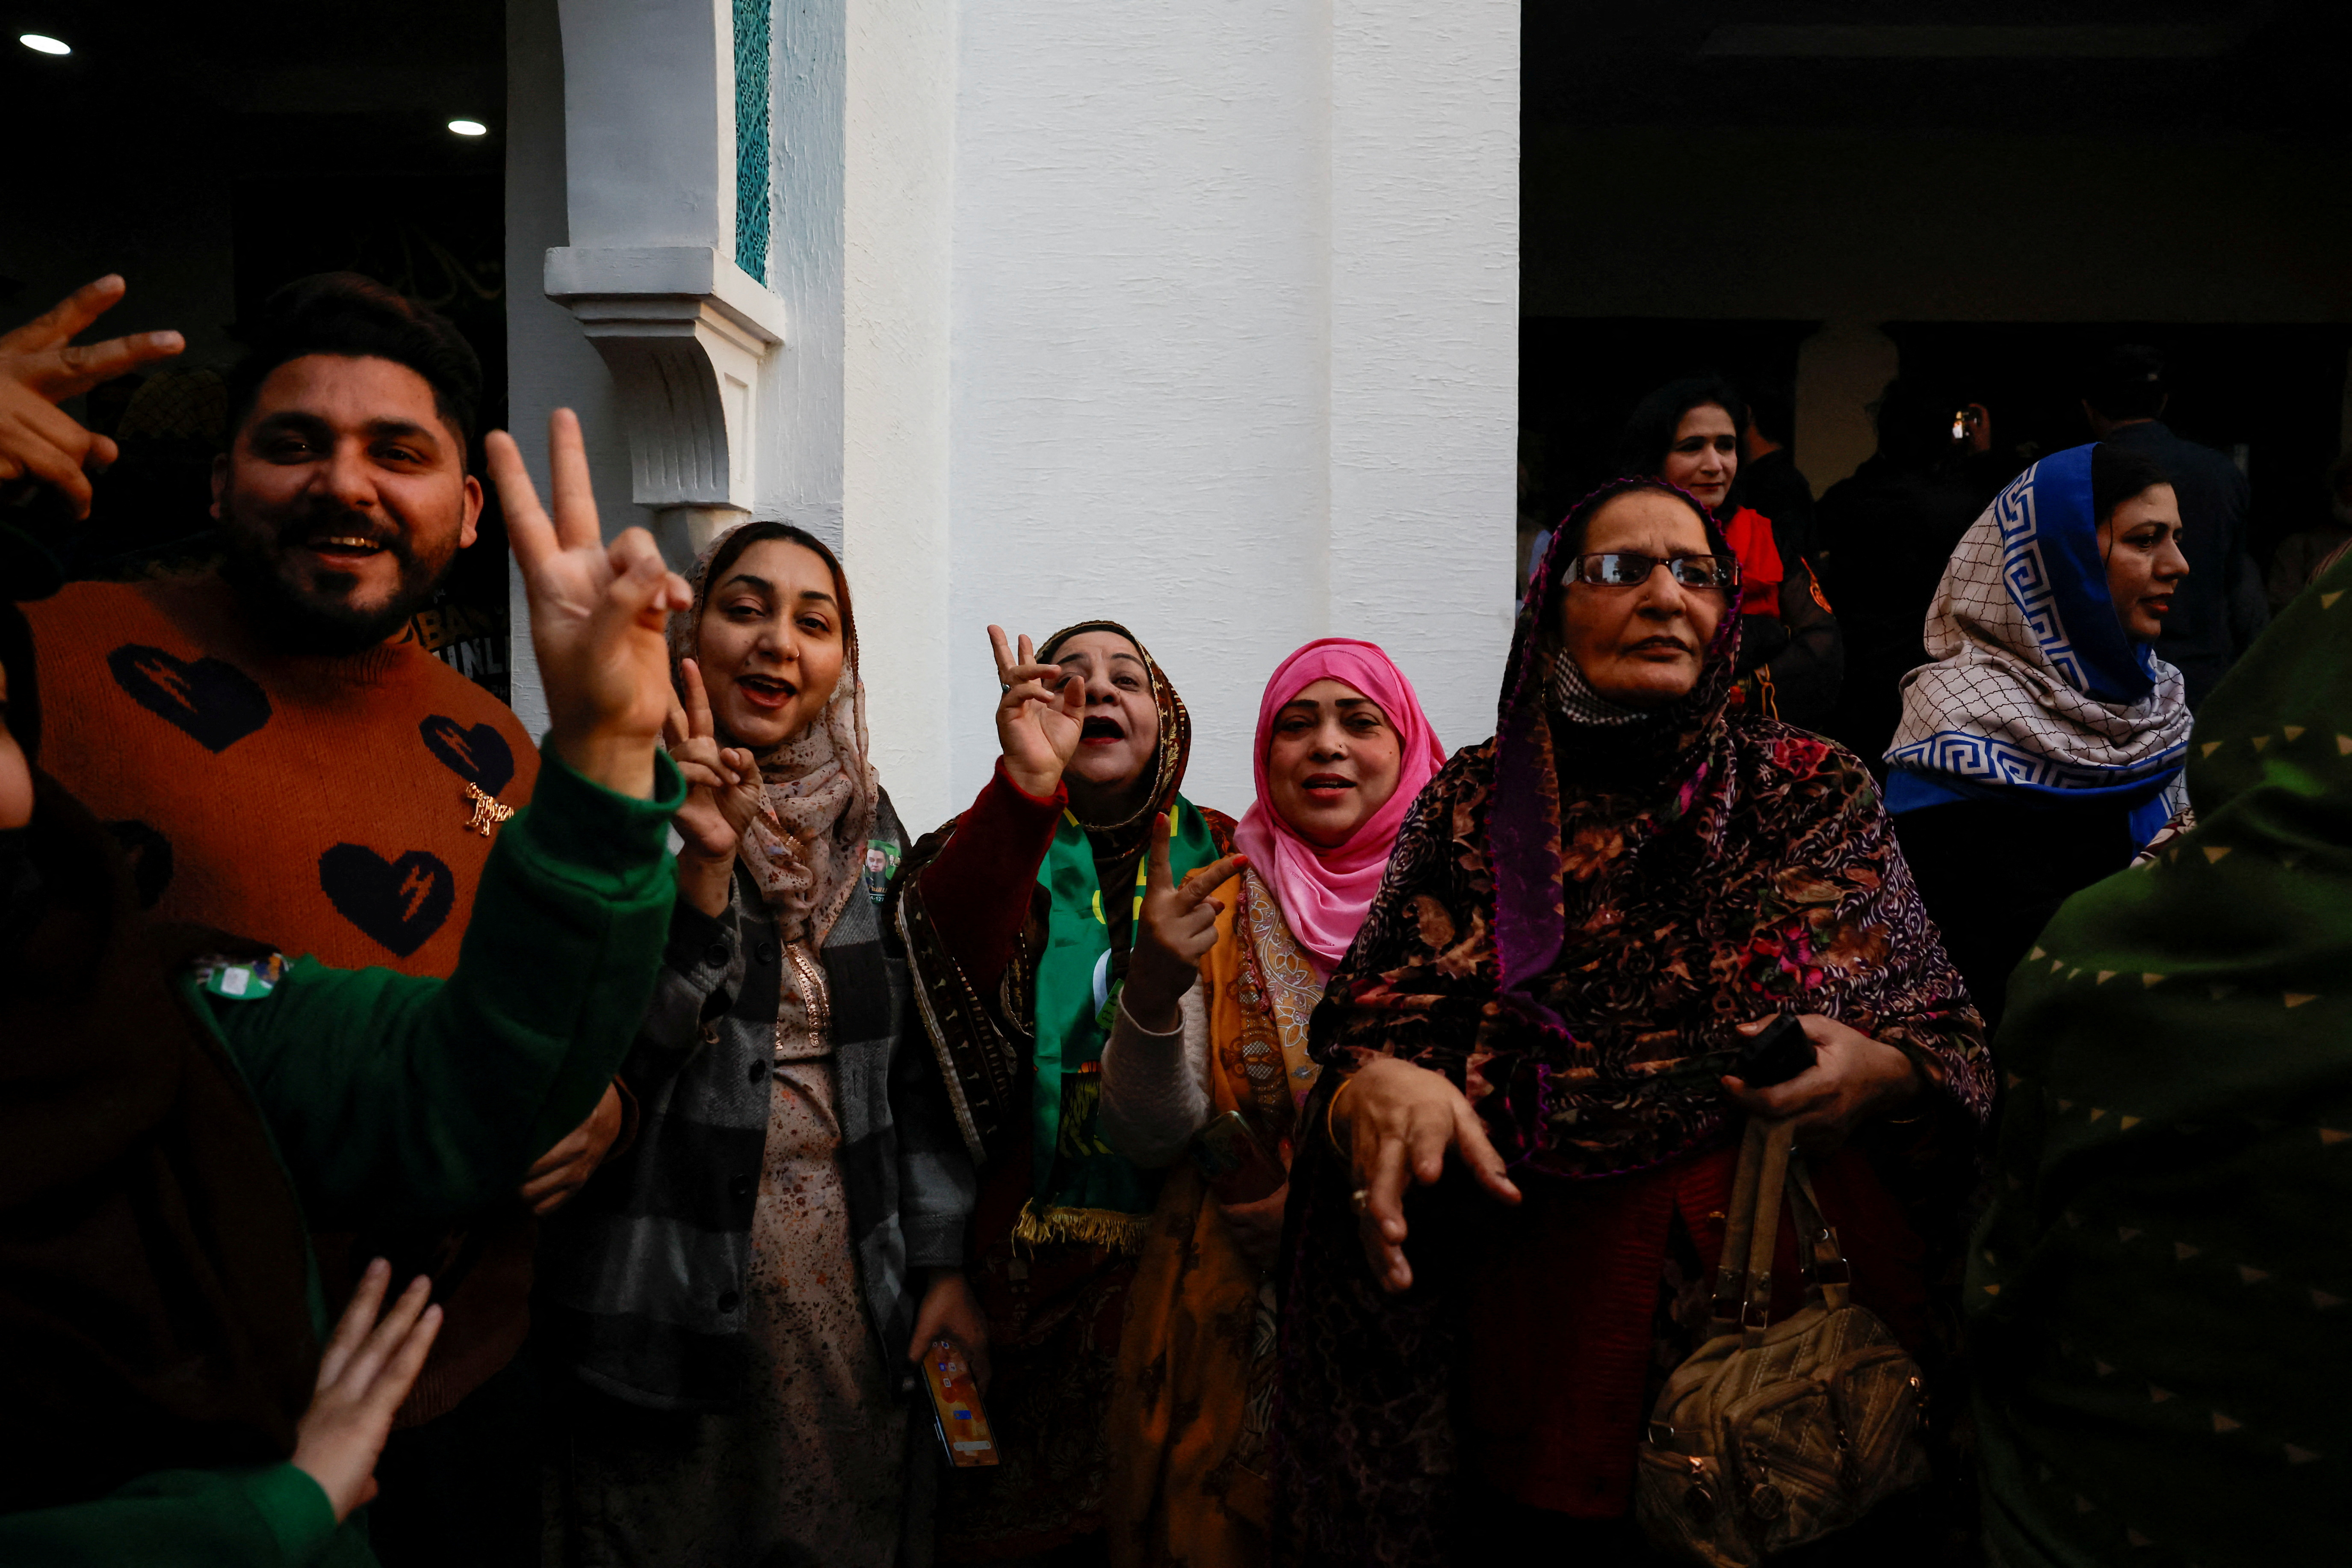 Supporters of Former Prime Minister of Pakistan Nawaz Sharif cheer as they gather at the party office of Pakistan Muslim League (N) at Model Town in Lahore